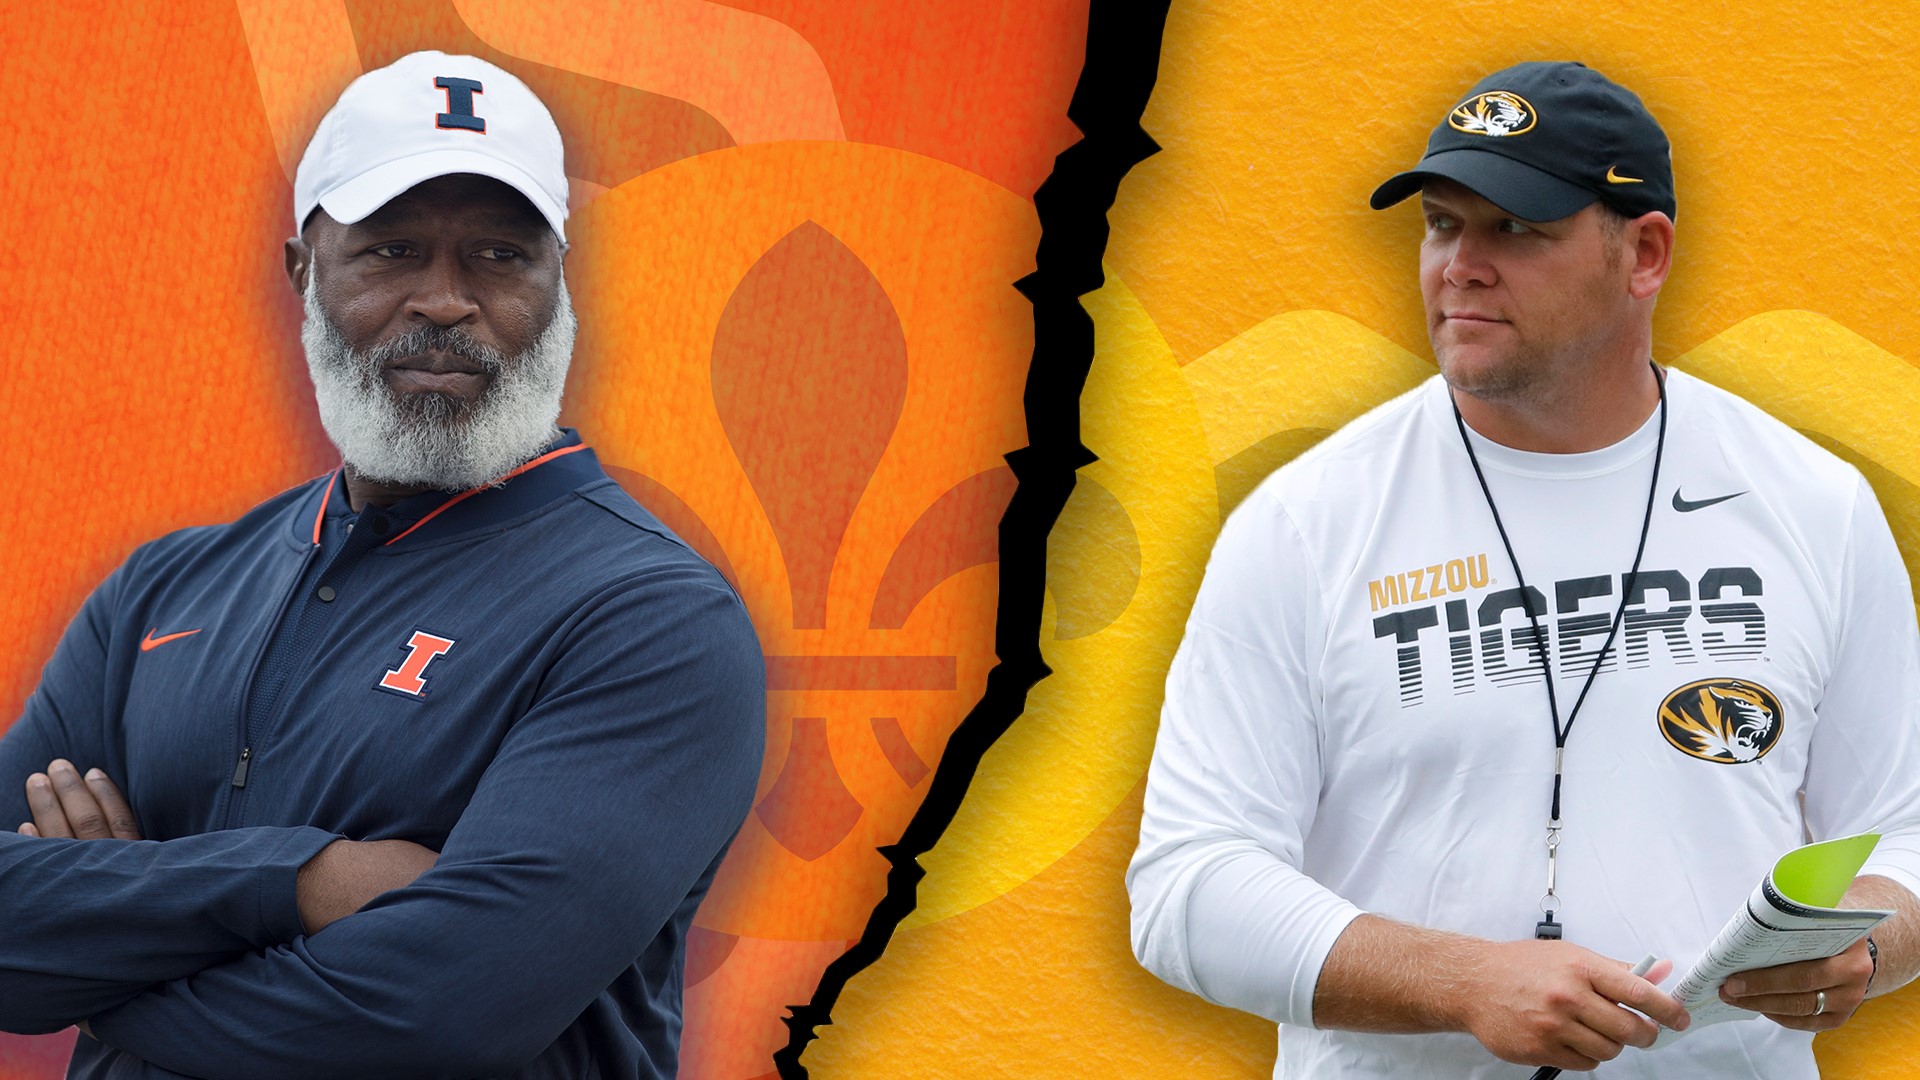 Mizzou and Illinois may not have faced off on the football field since 2010, but the arch rivalry is still strong. Both rosters are loaded with local talent in 2019.